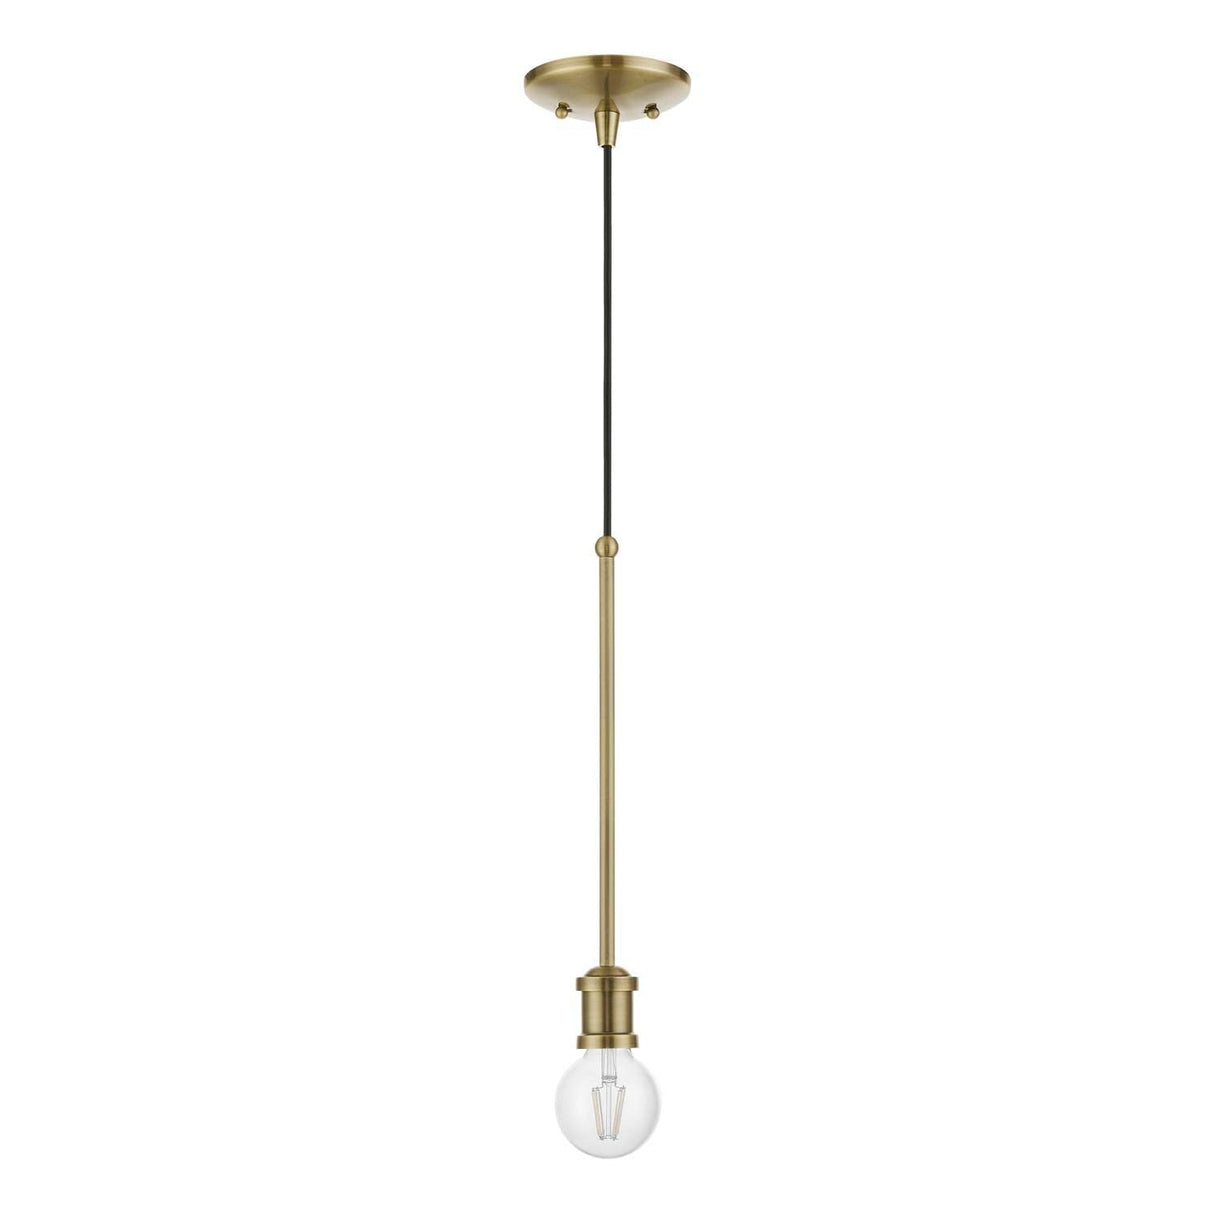 Lansdale 1 Light Pendant in Antique Brass (47161-01)